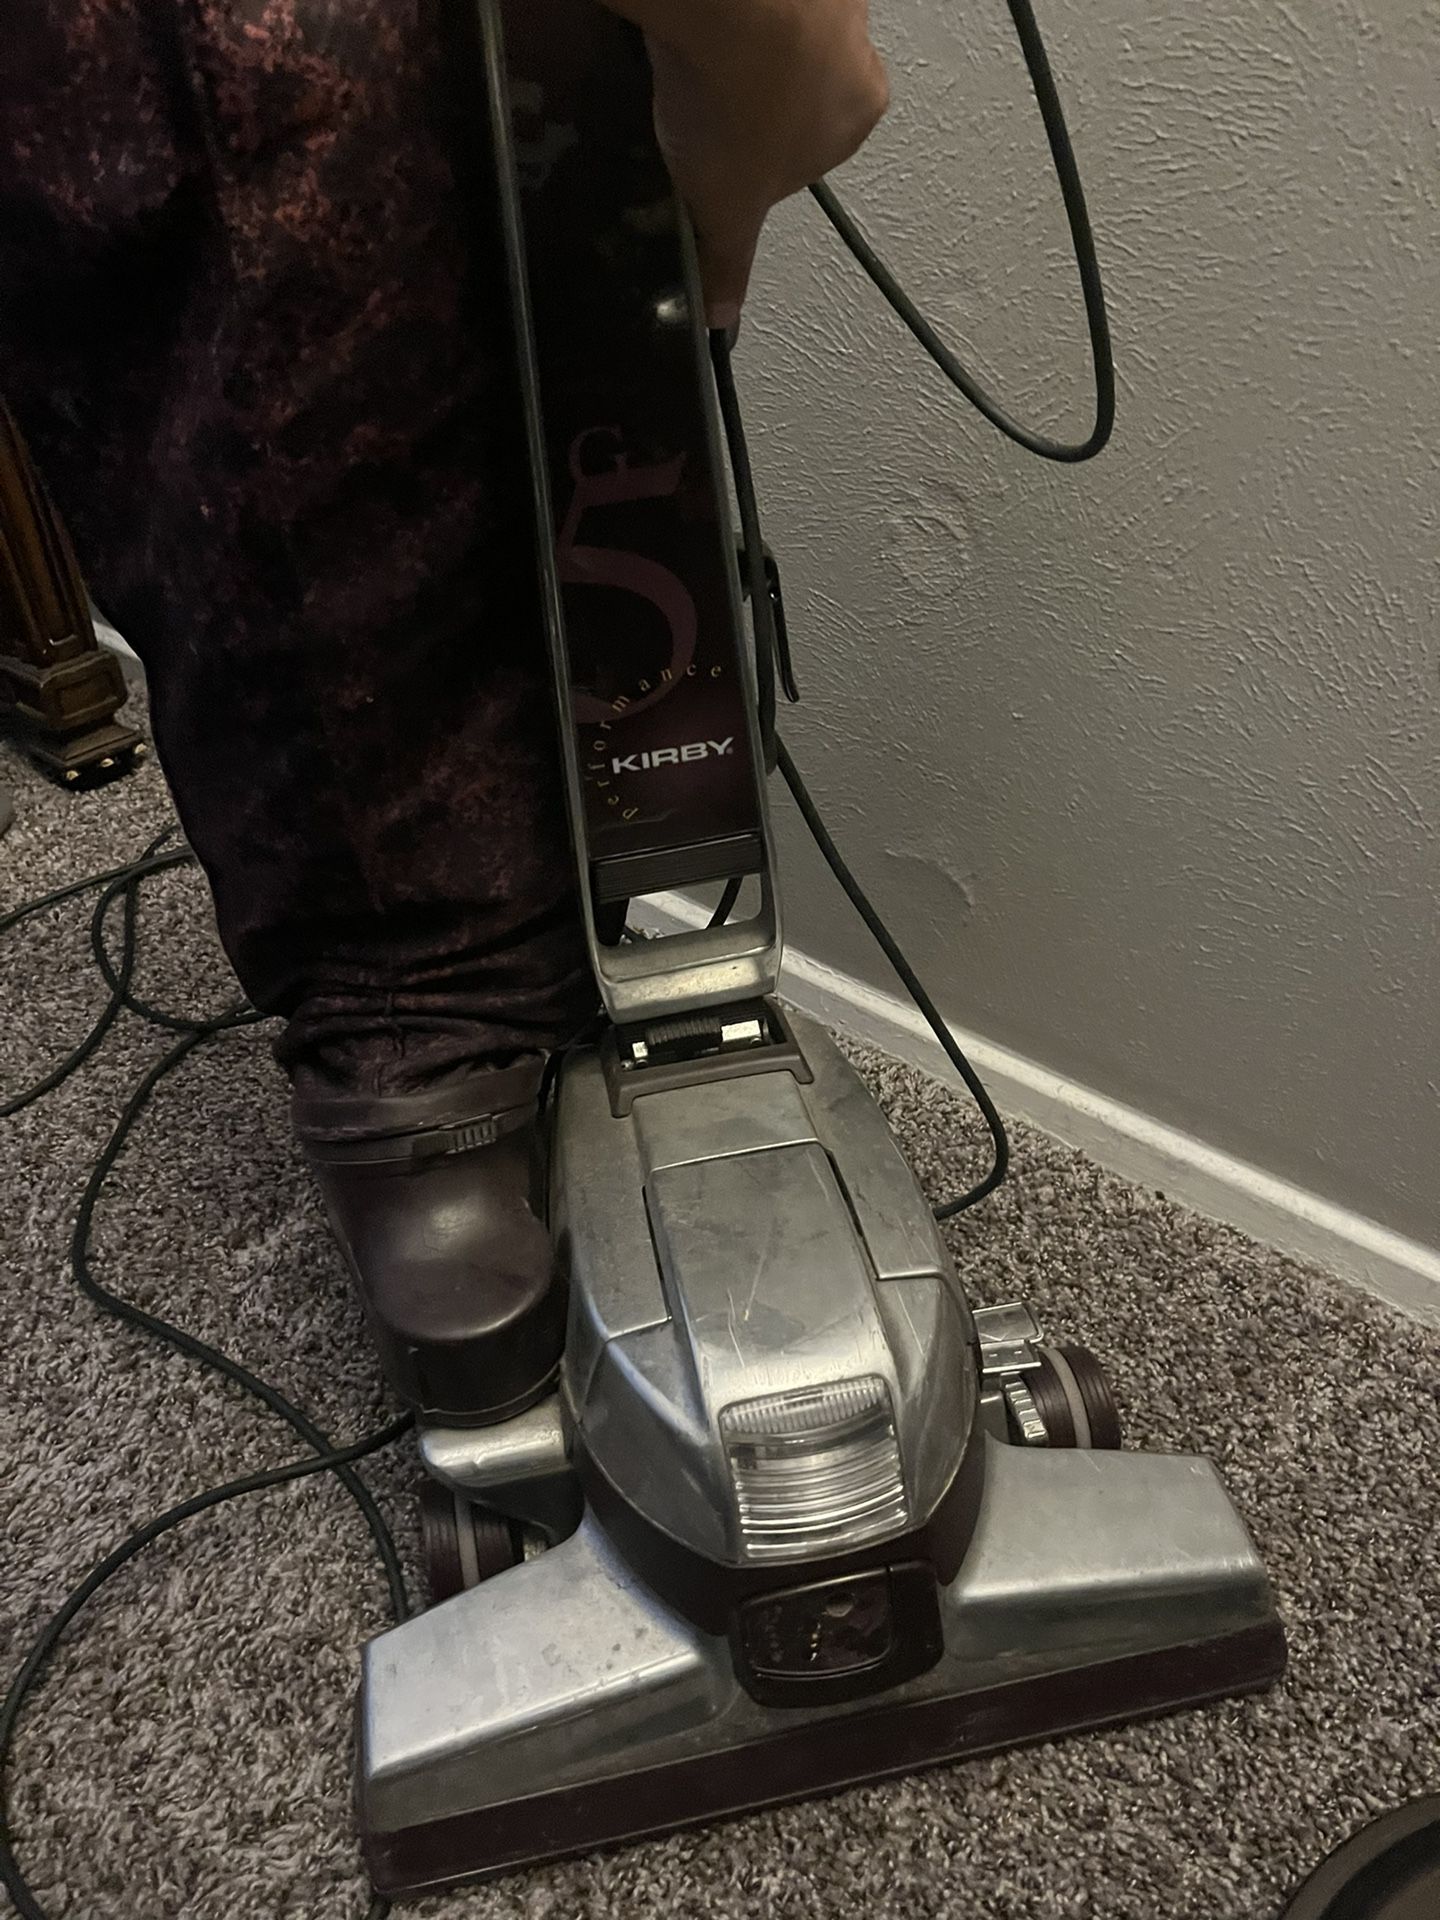 Kirby Vacuum Great Condition!